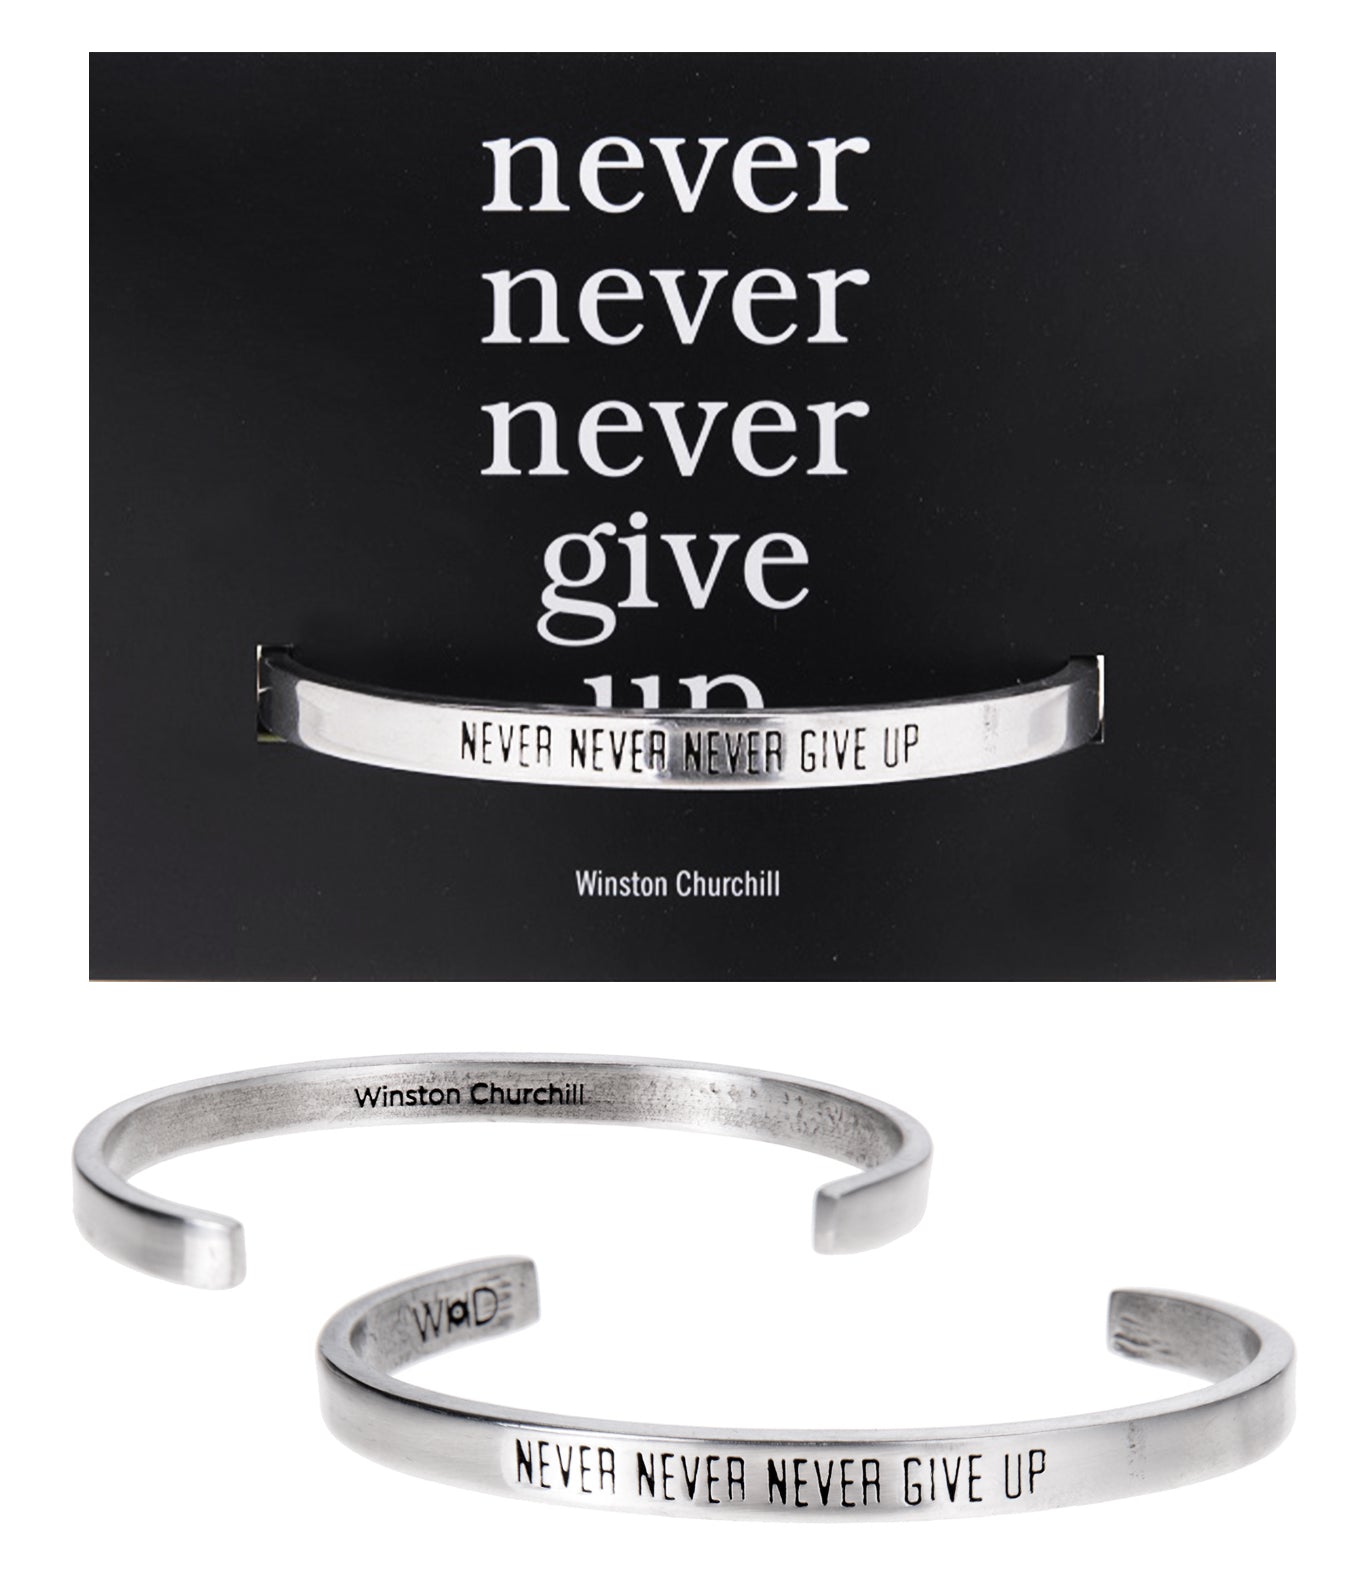 Never Never Never Give Up Winston Churchill Quotable Cuff Bracelet with backer card